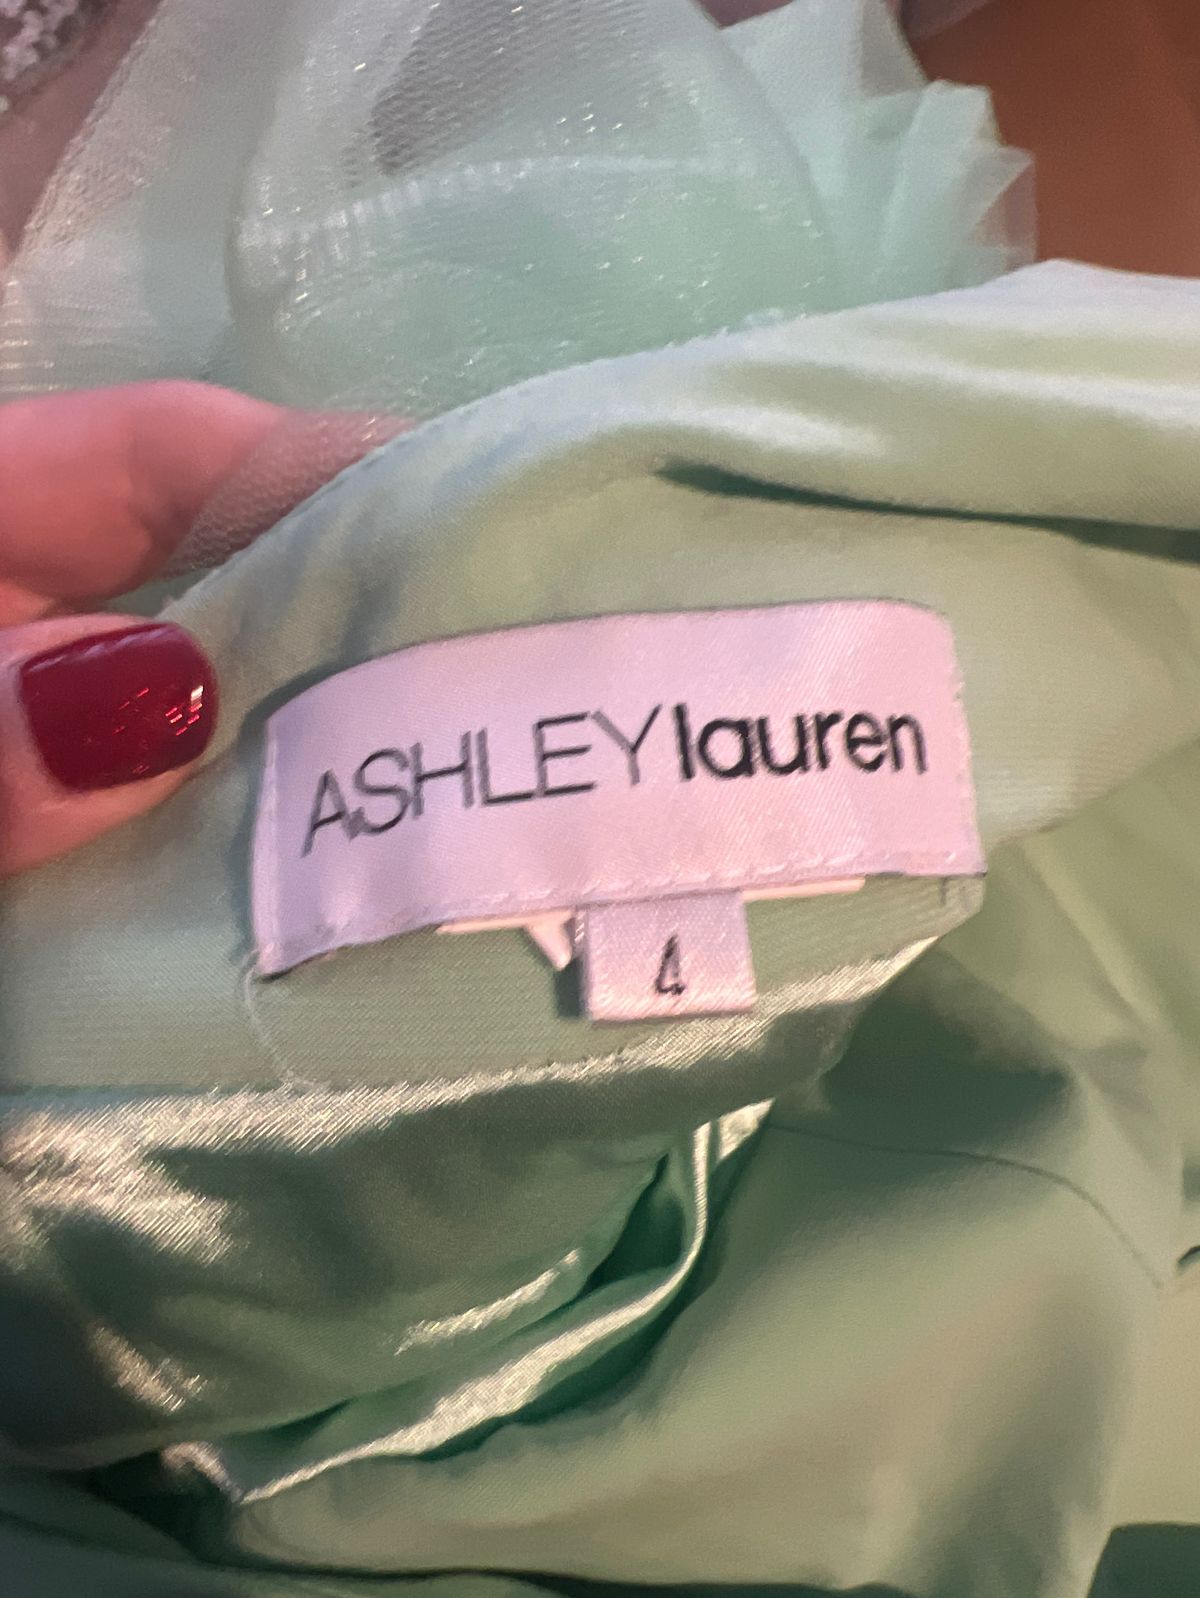 Ashley Lauren Size 4 Prom Green Ball Gown on Queenly